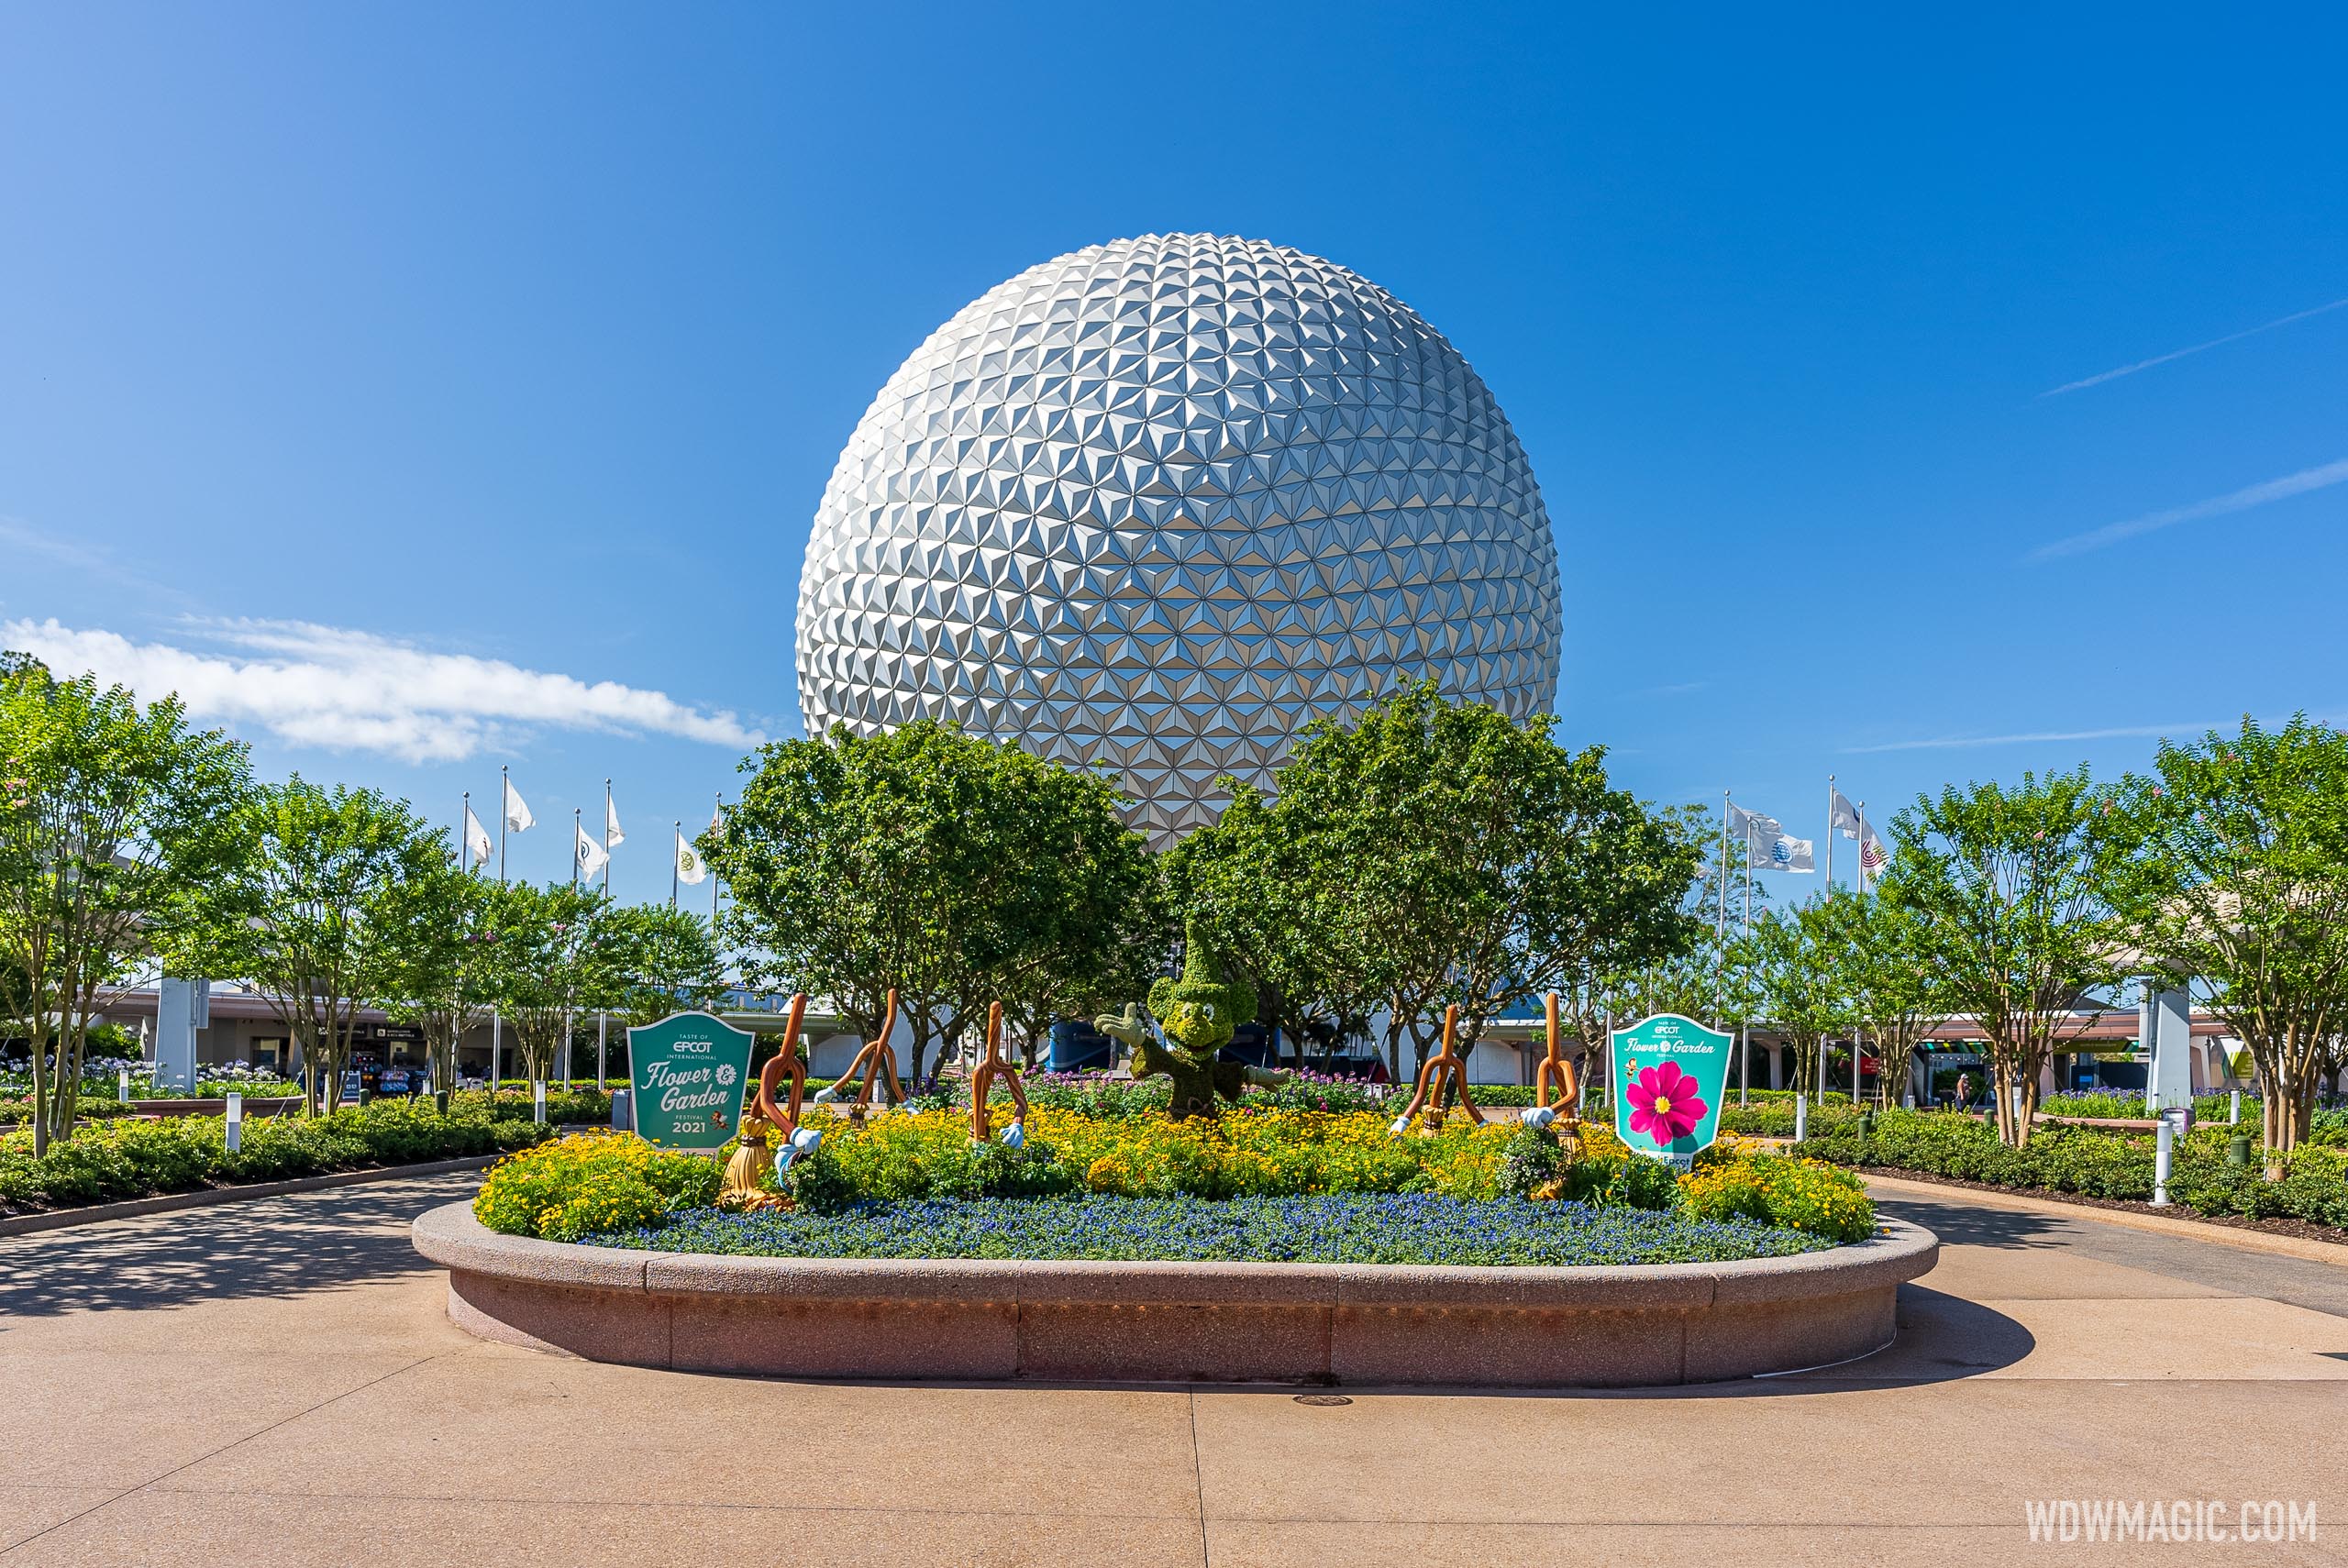 Cultural Representatives returning to EPCOT's World Showcase later this summer